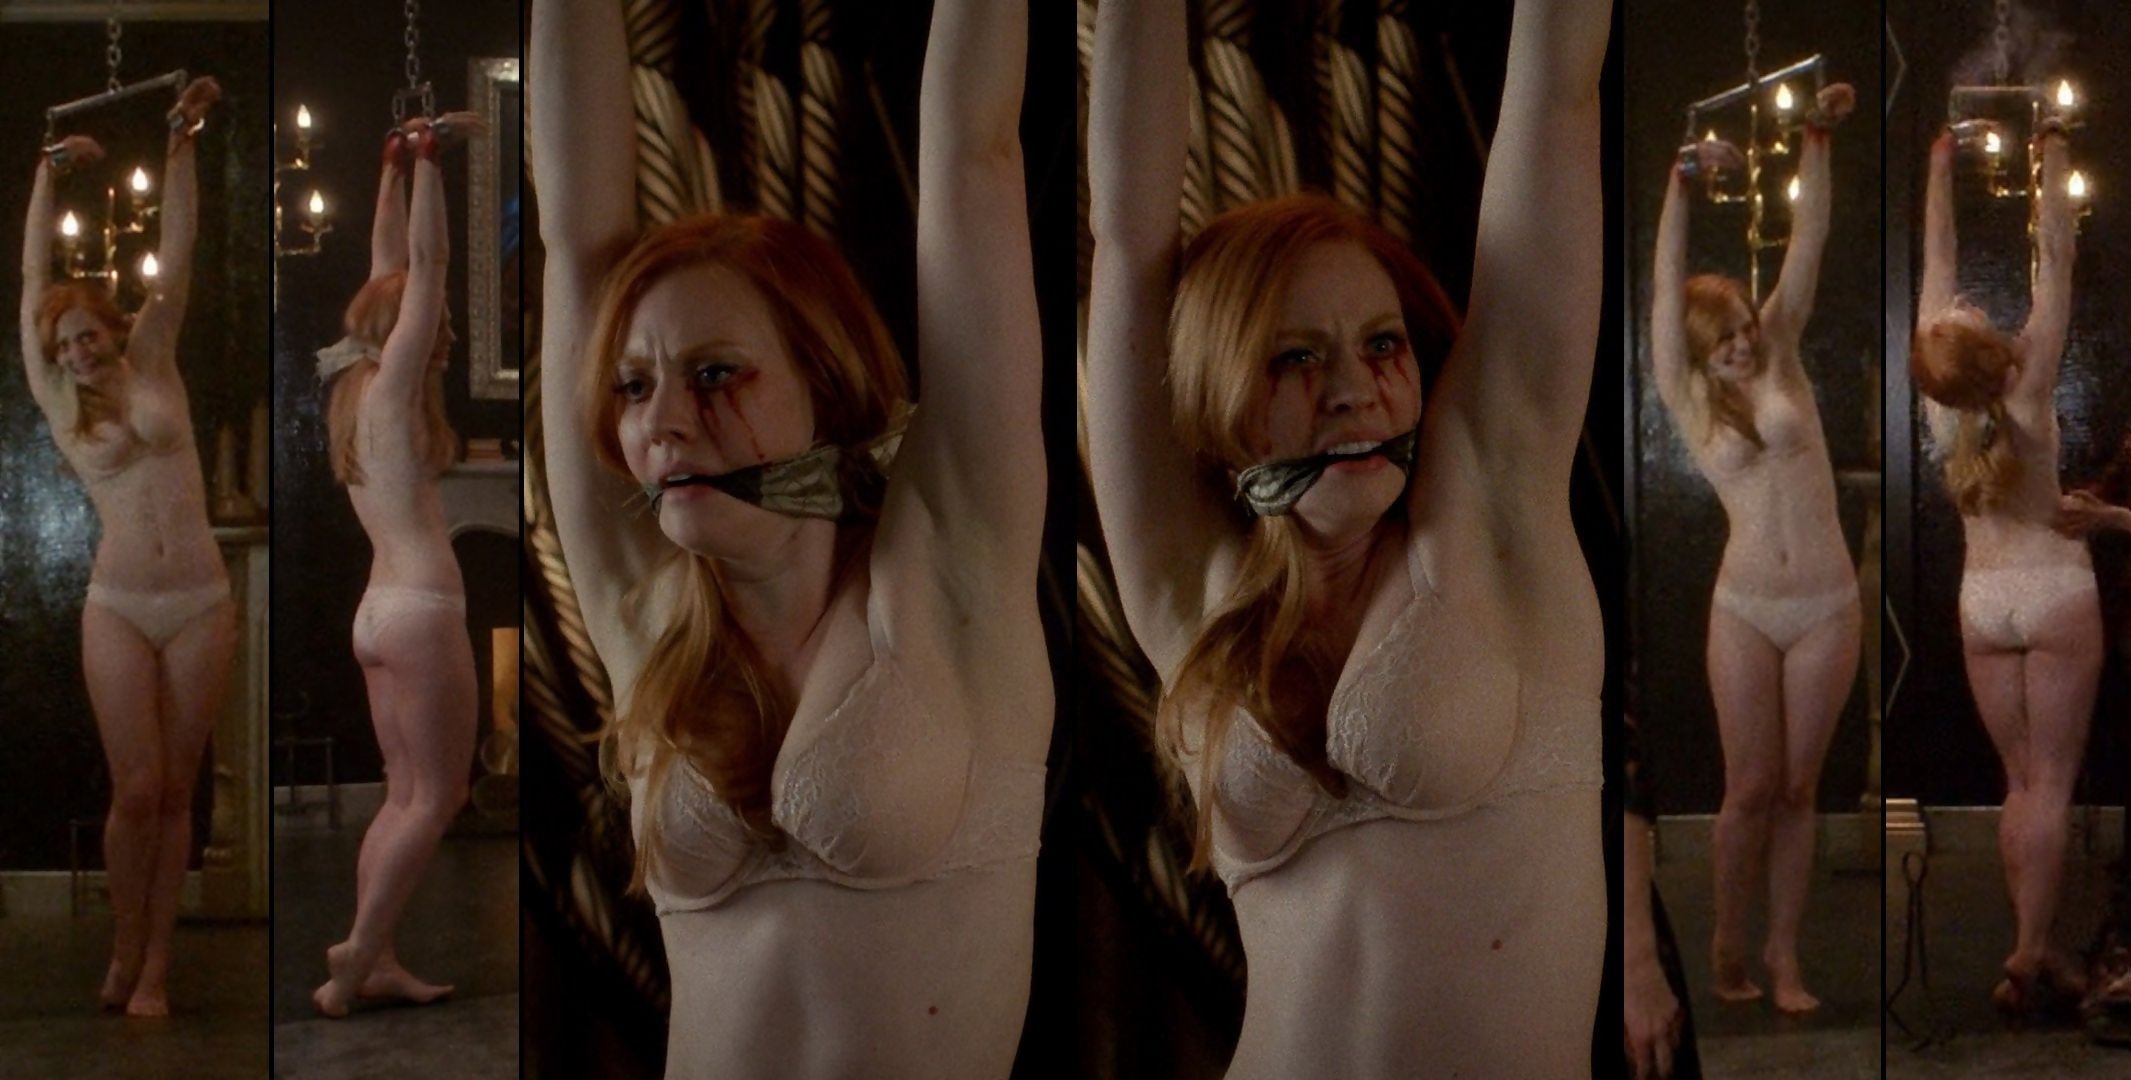 chelsea epperly share deborah ann woll nude pictures photos